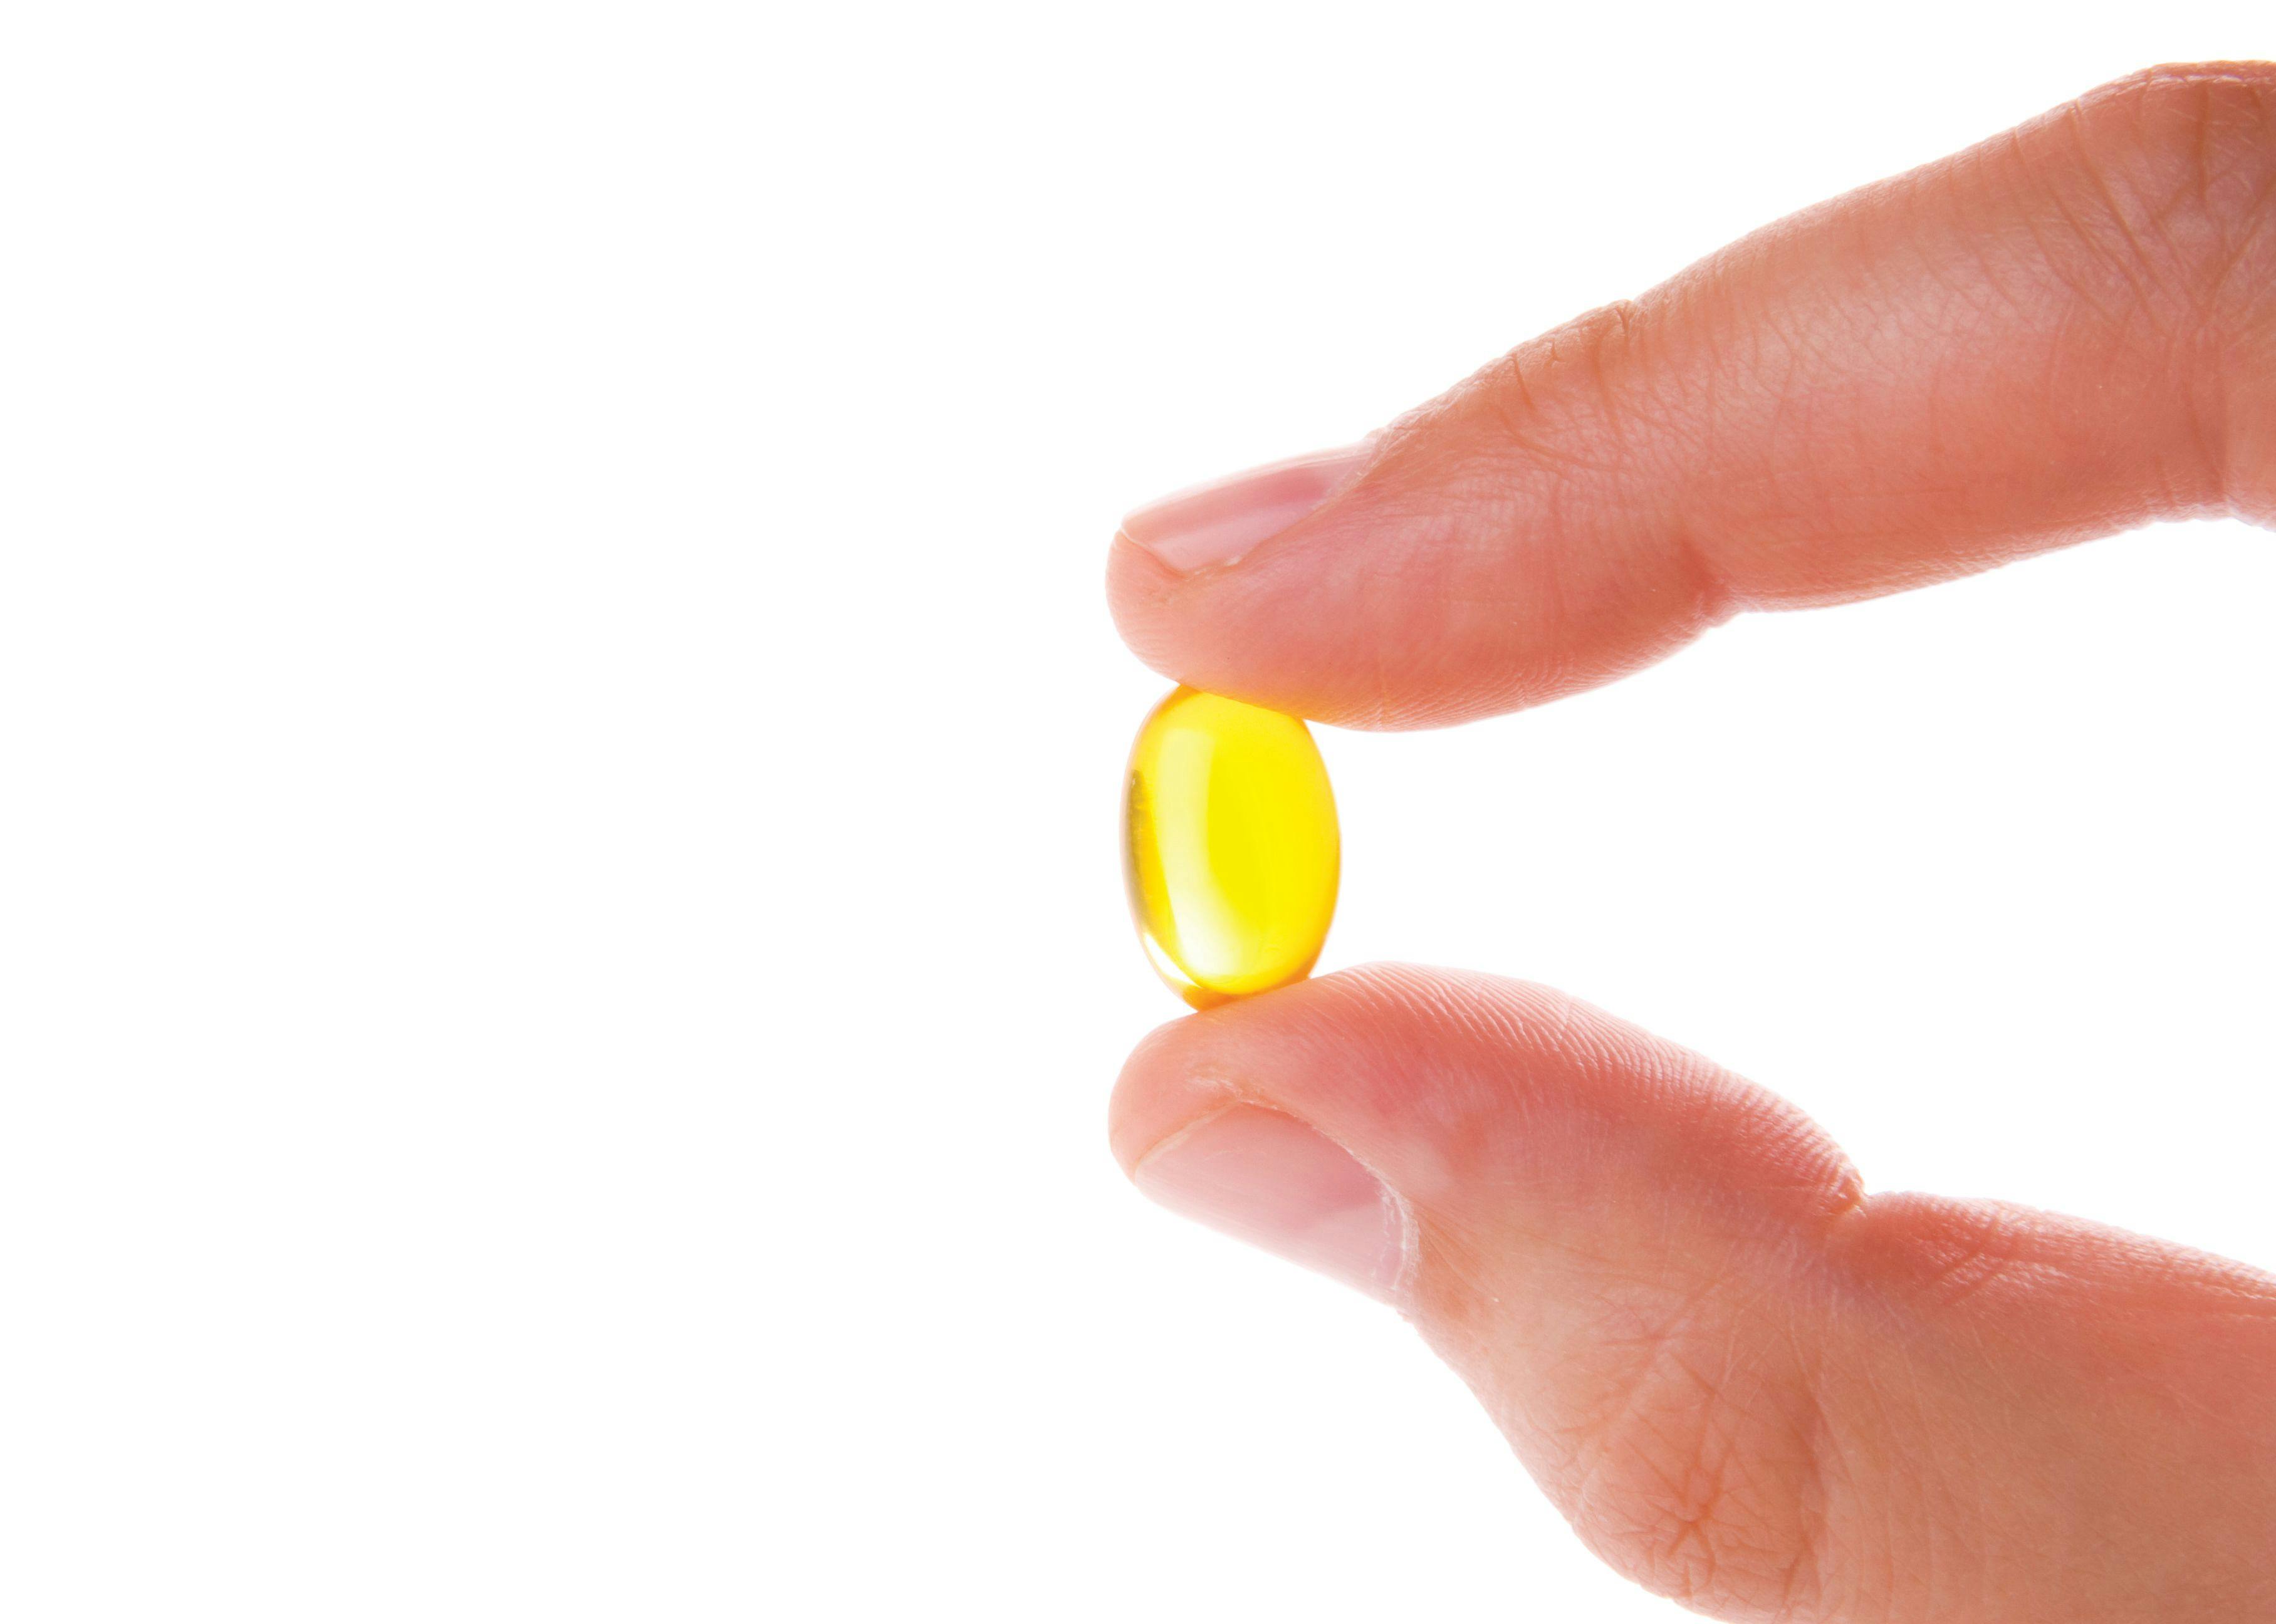 DSM Says It Has New Data on the Krill versus Fish Oil Bioavailability Debate-They’re Similar